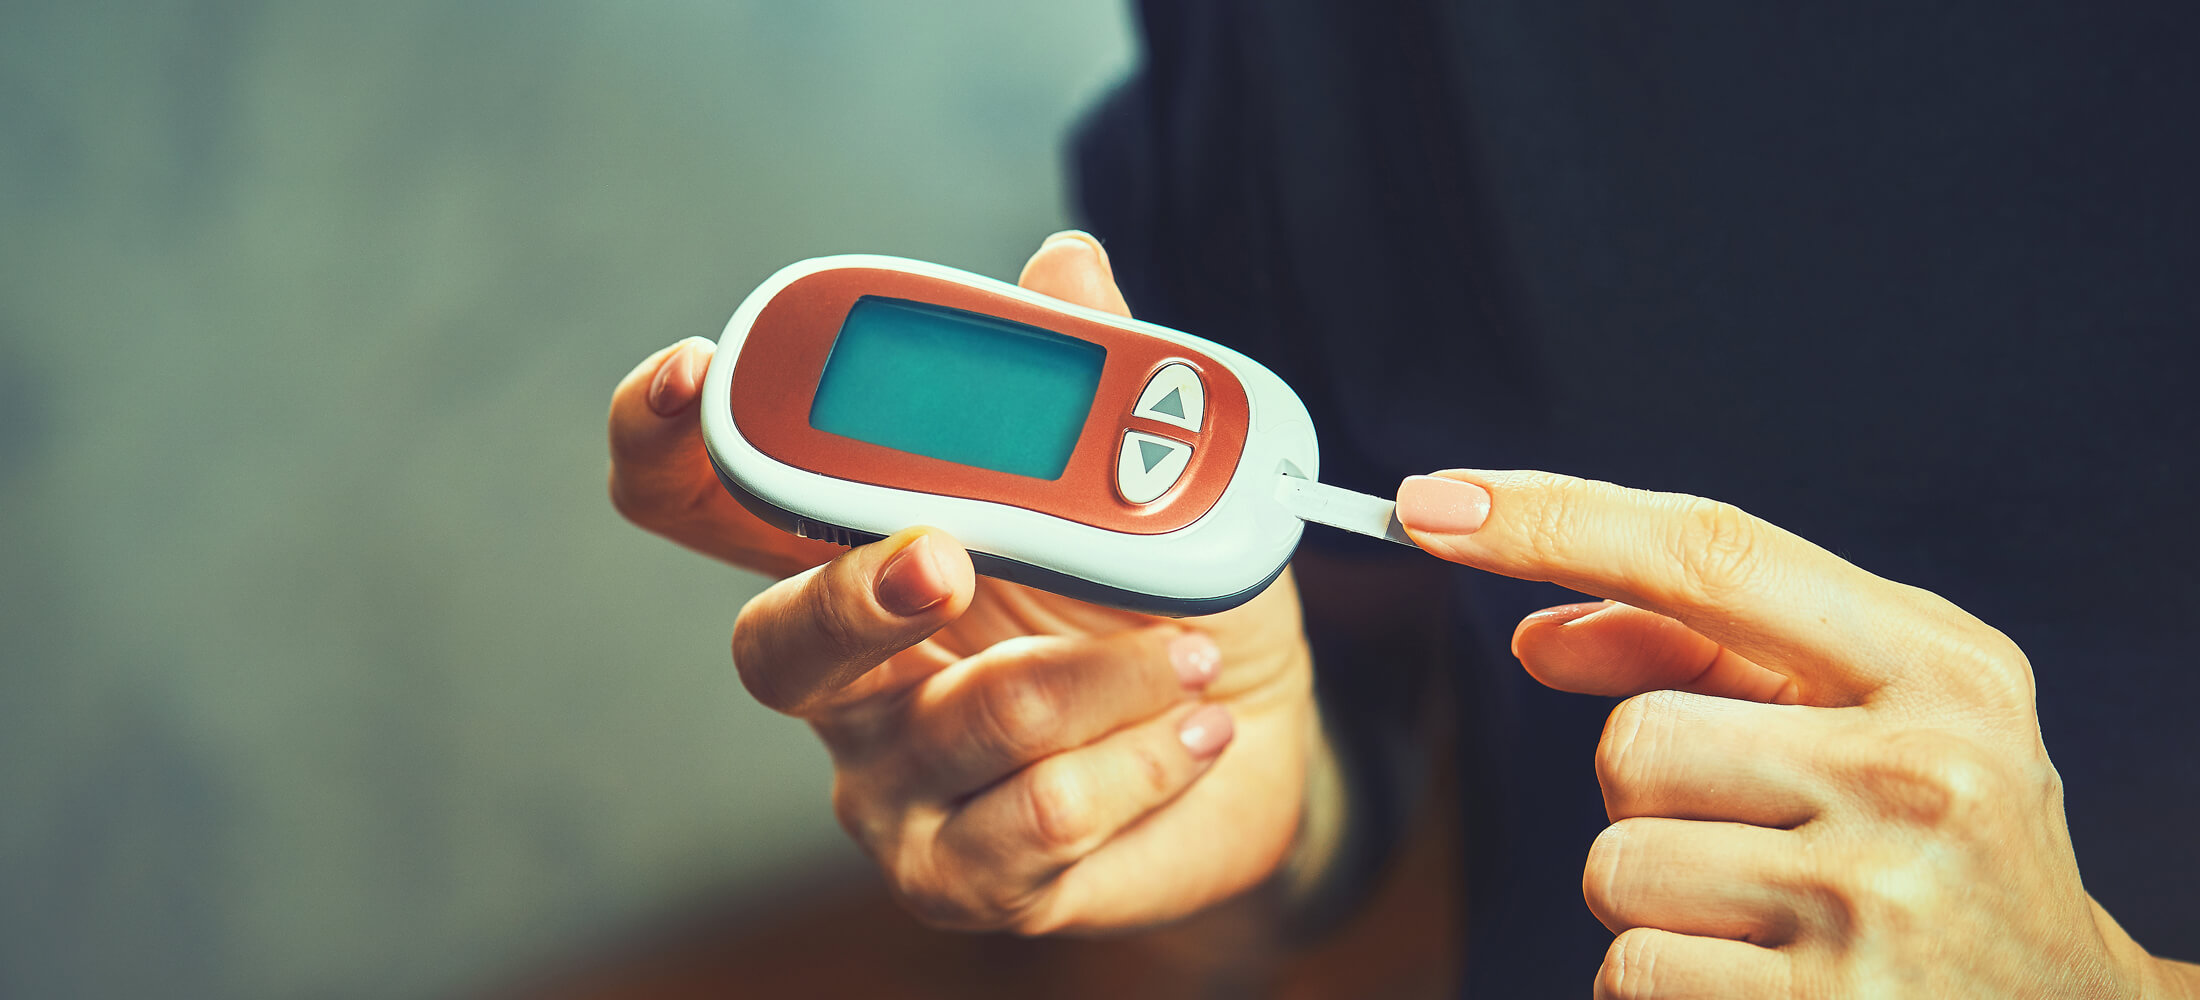 A person adds blood from a pinprick on their finger to their Blood Glucose Monitor.